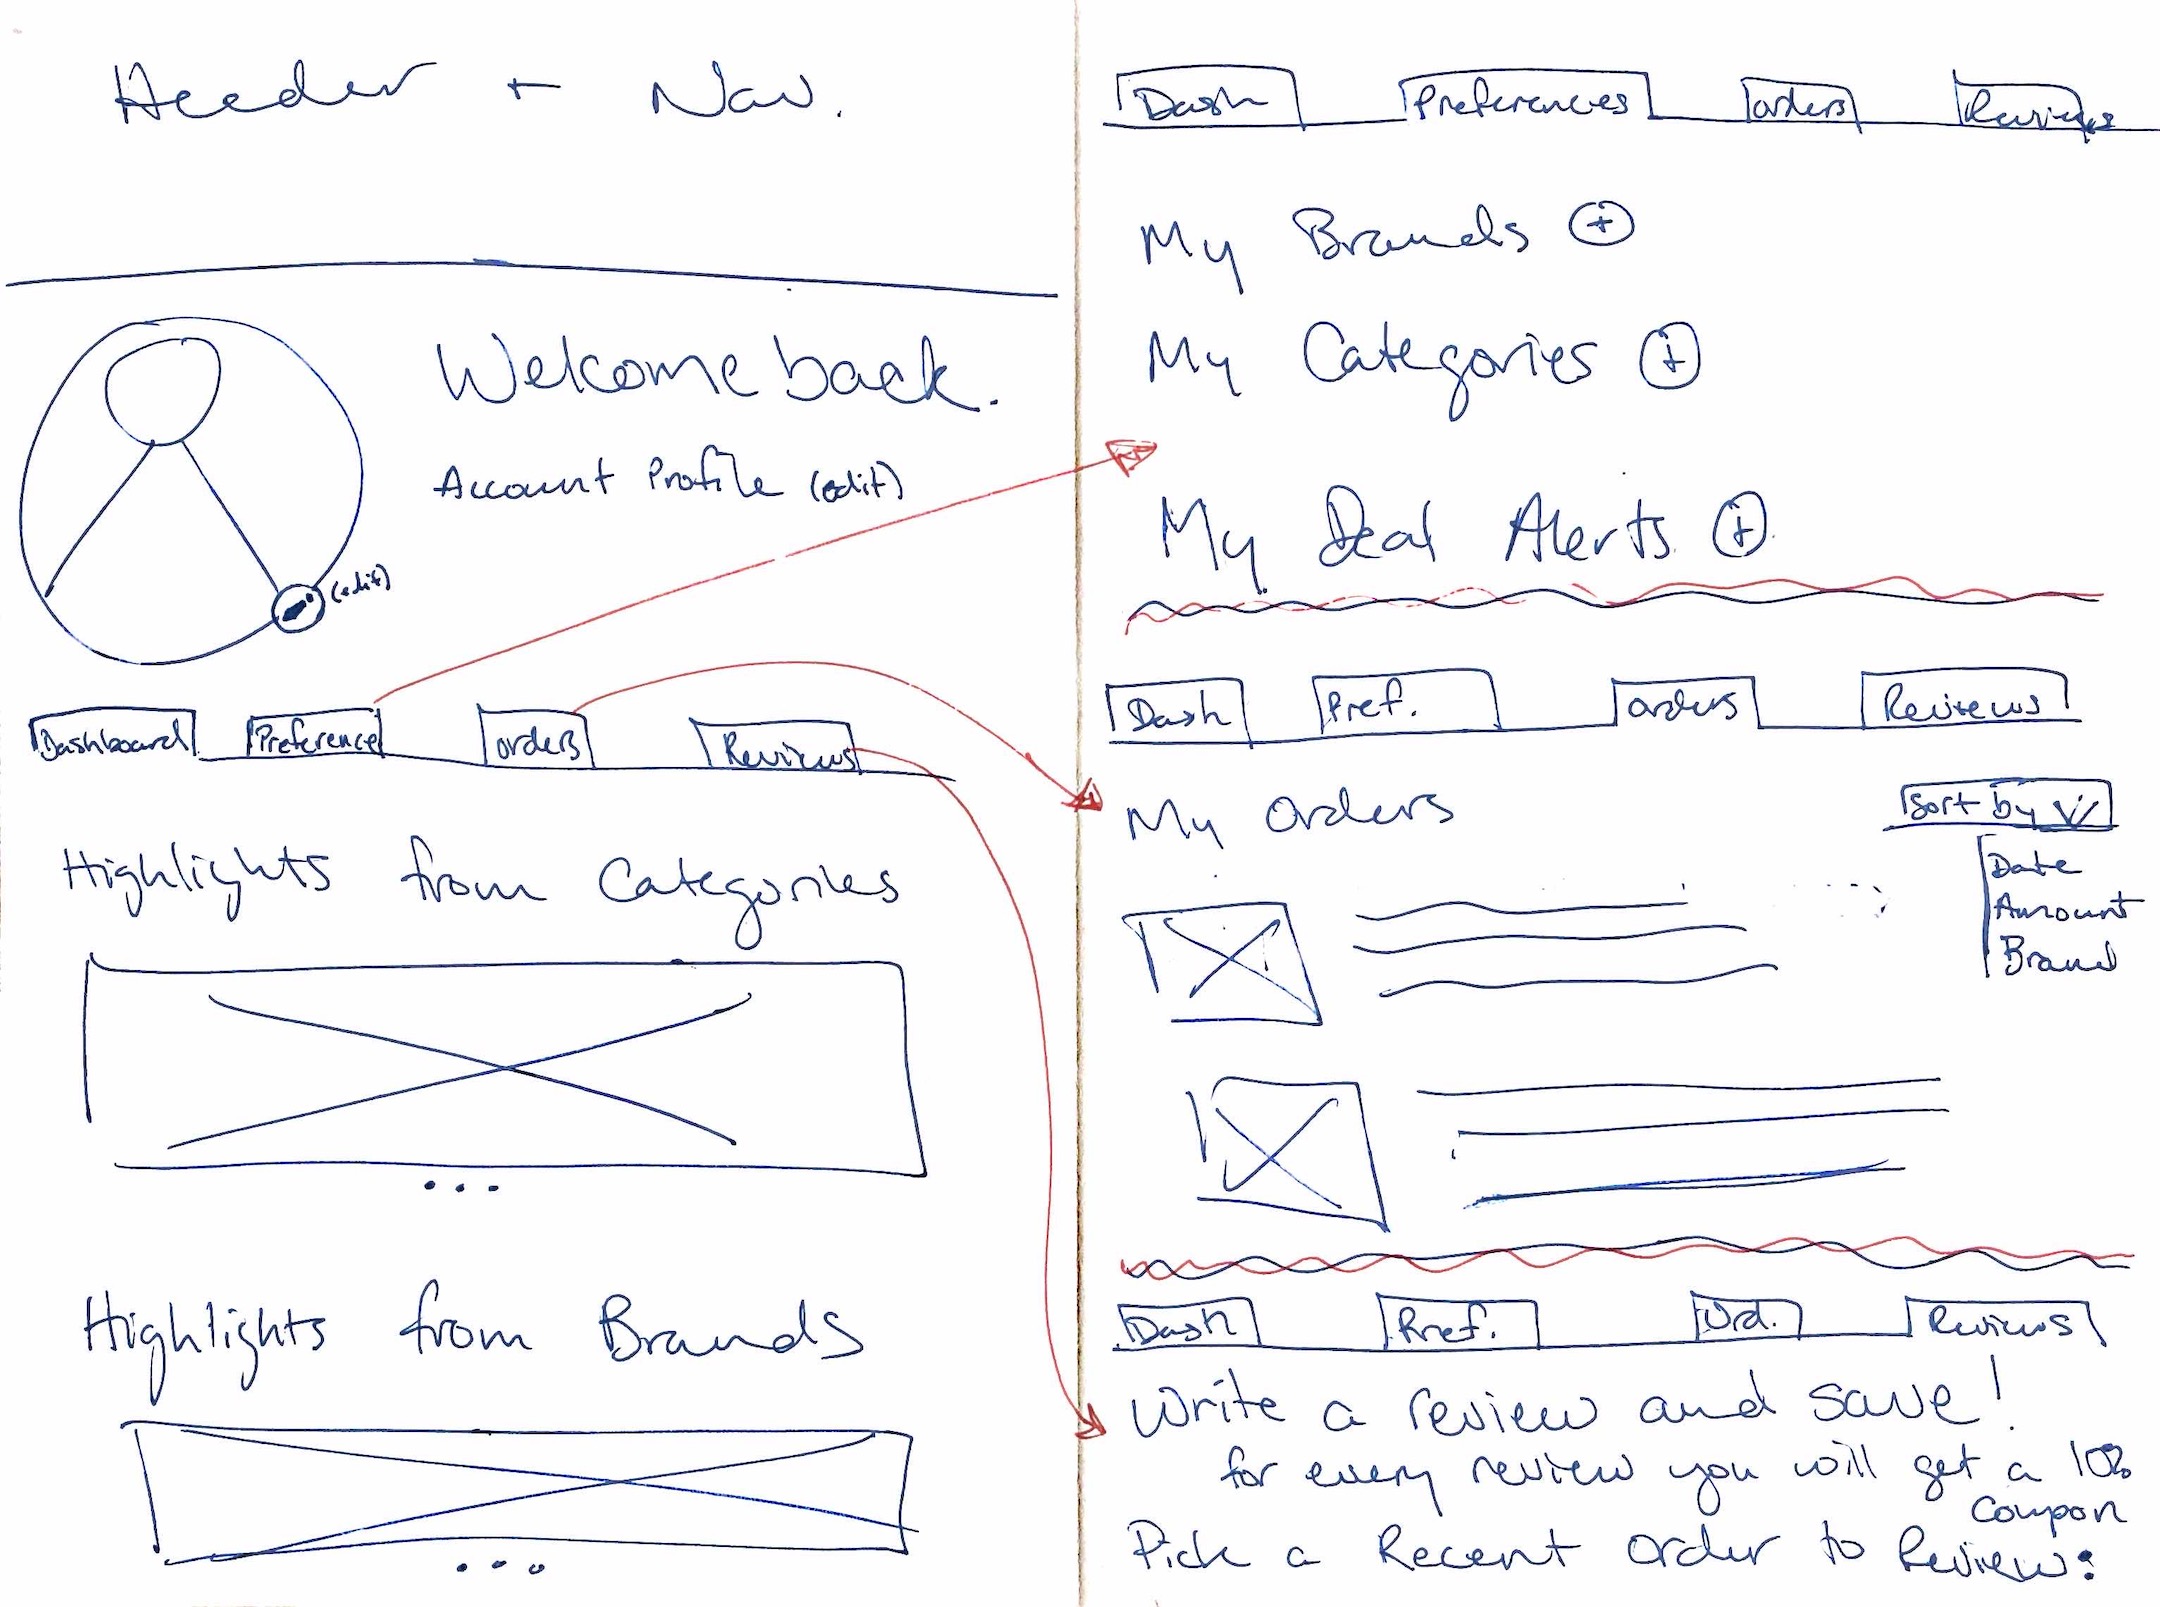 Hand-sketched Rebolet account page ideation